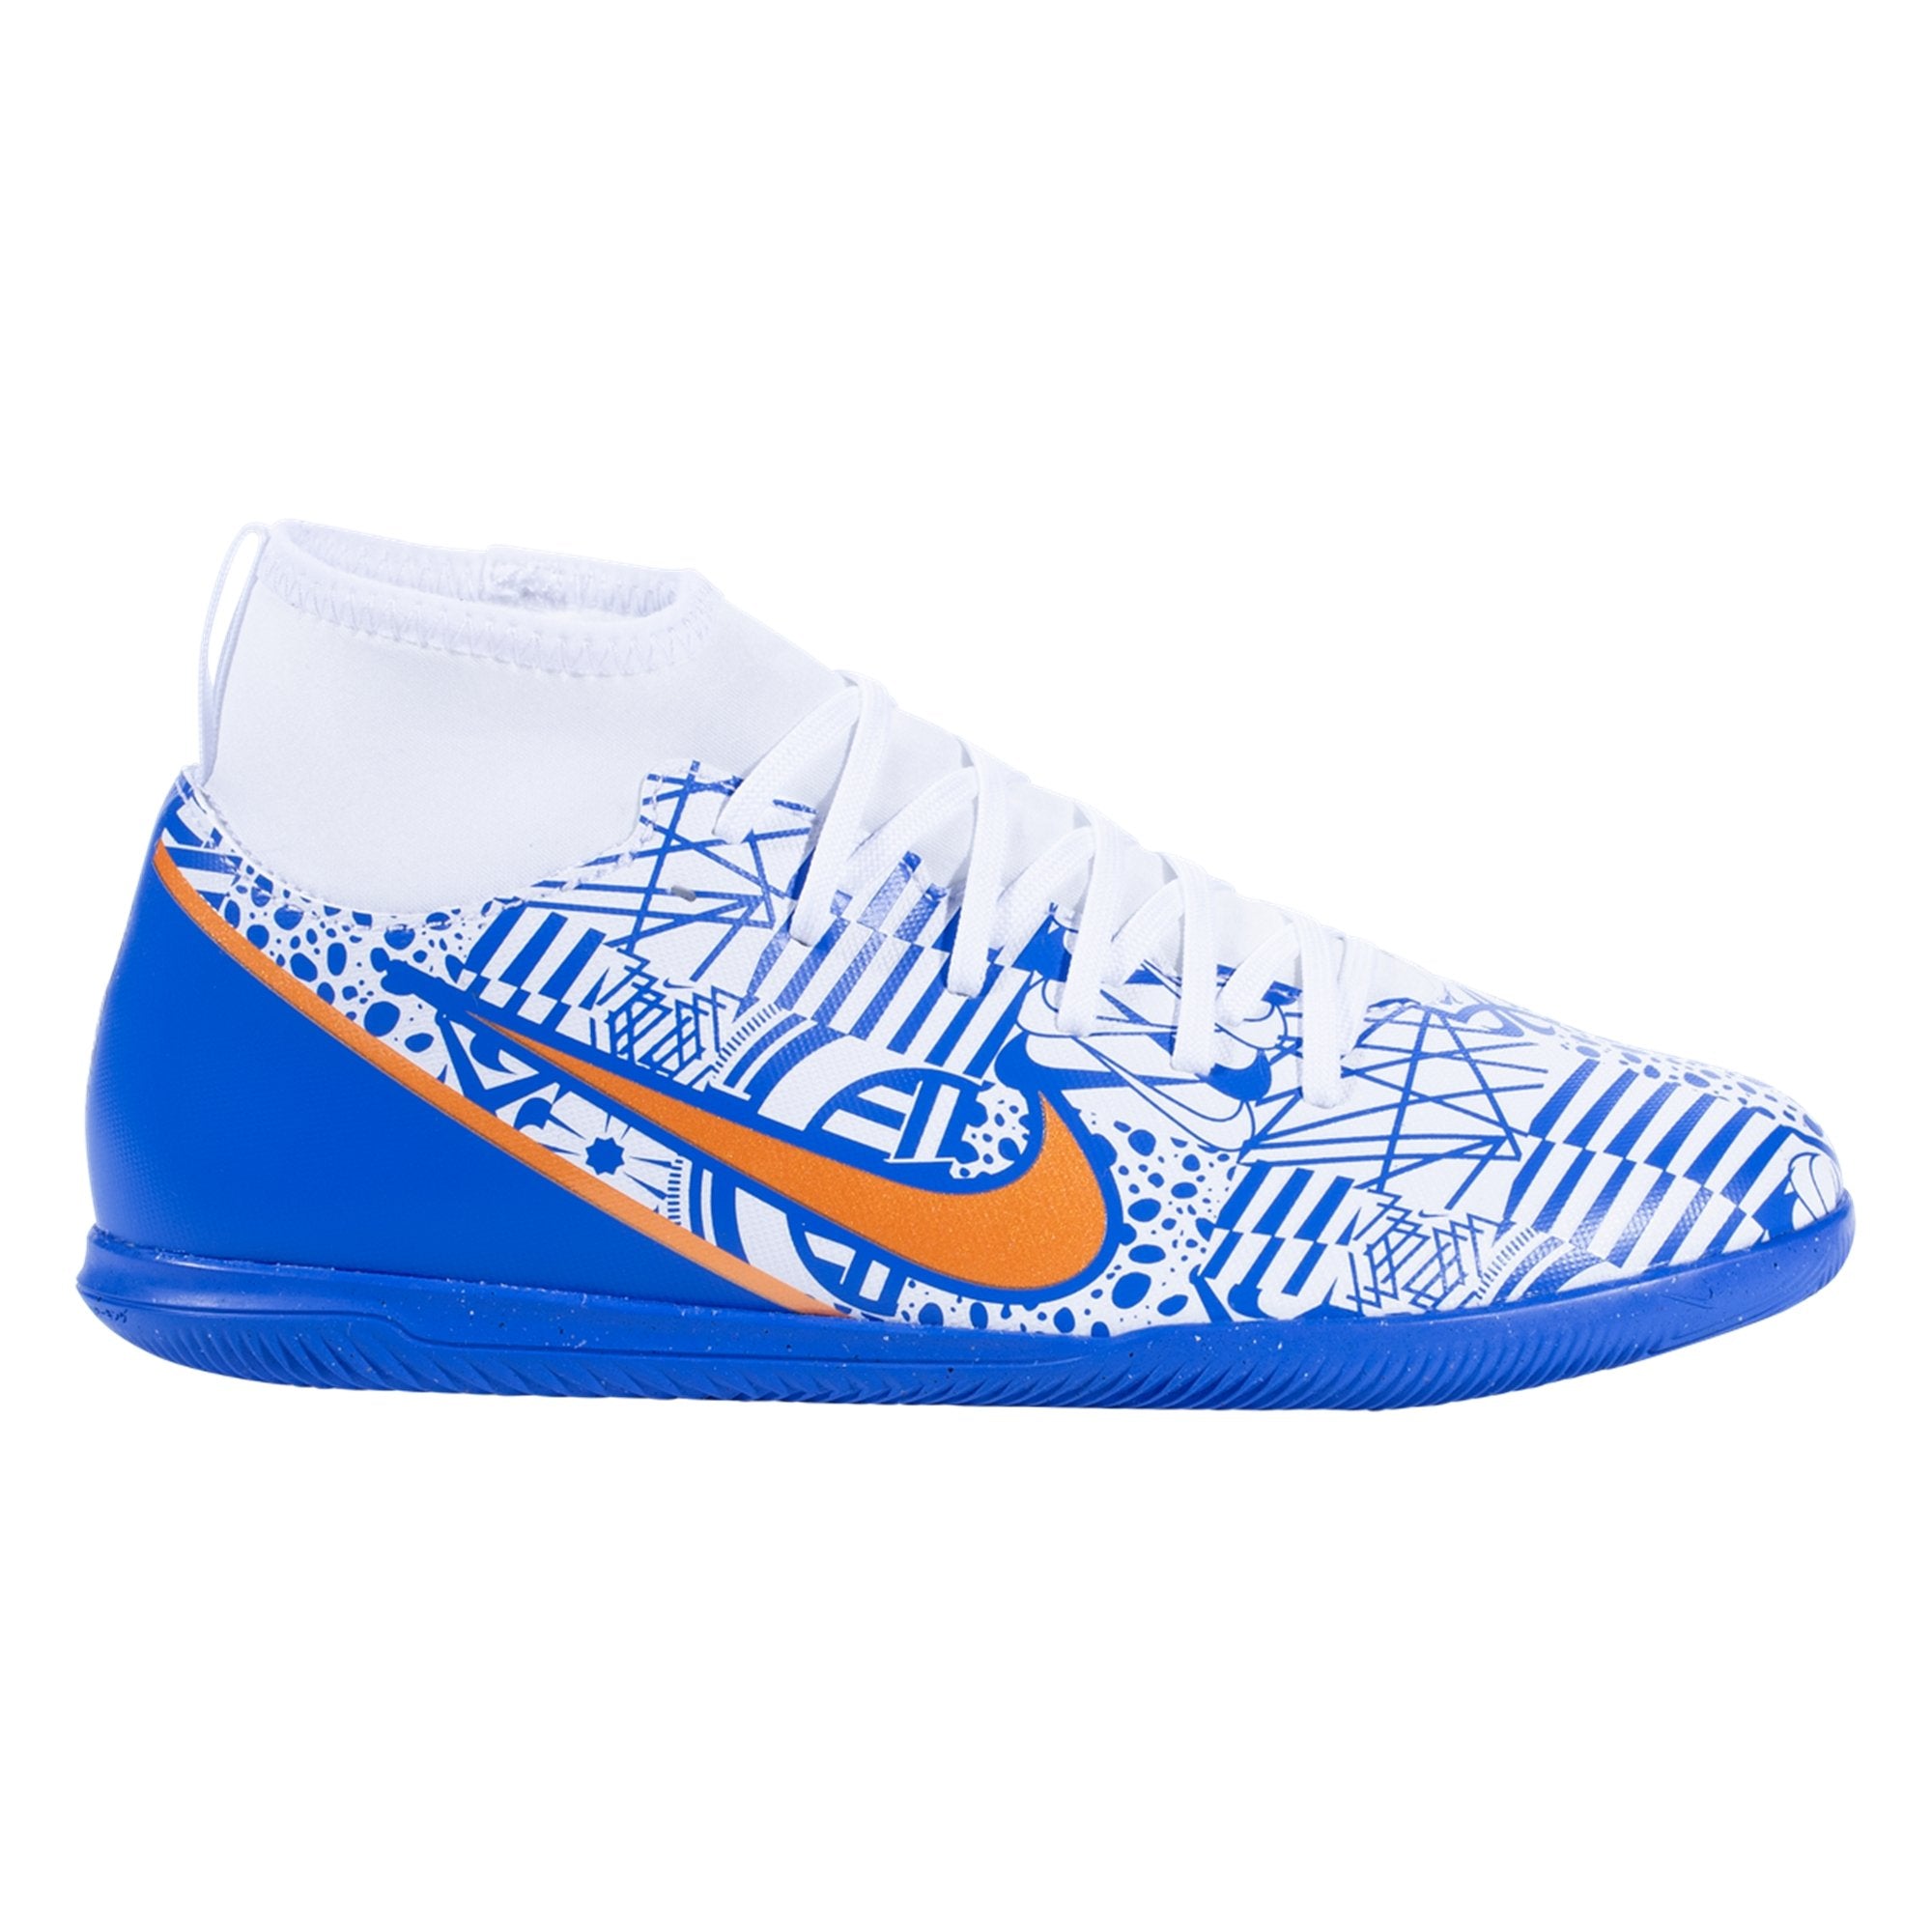 Nike Junior 9 CR7 IC Indoor Shoes - White/MetallicCopper/Concord/MediumBlue DQ5327-182 Soccer Zone USA